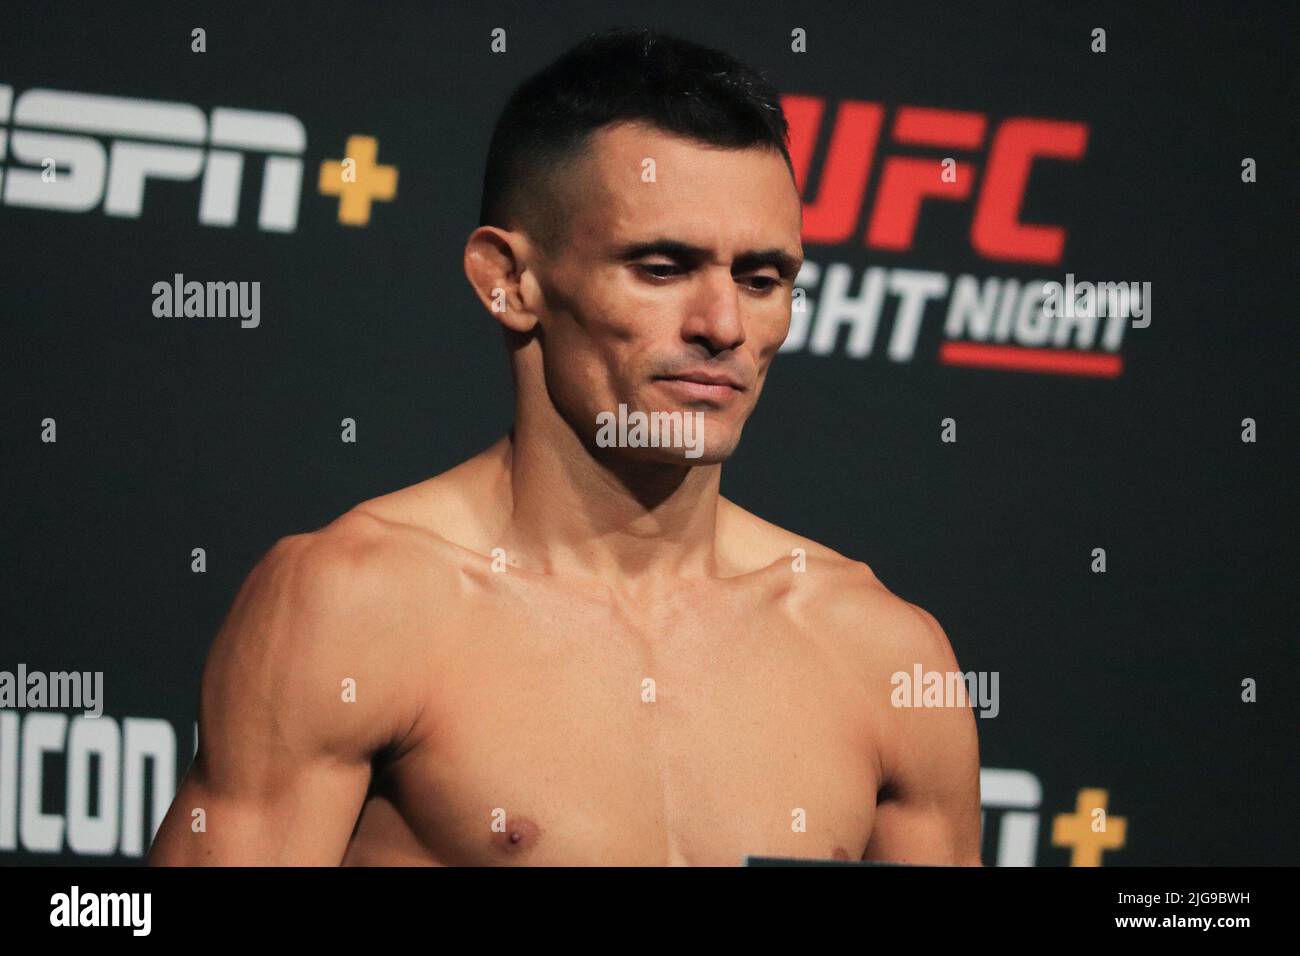 LAS VEGAS, NV - JULY 8: Douglas Silva de Andrade poses on the scale during the UFC Fight Night: Dos Anjos v Fiziev Weigh-in at UFC Apex on July 8, 2022 in Las Vegas, Nevada, United States. (Photo by Diego Ribas/PxImages) Credit: Px Images/Alamy Live News Stock Photo